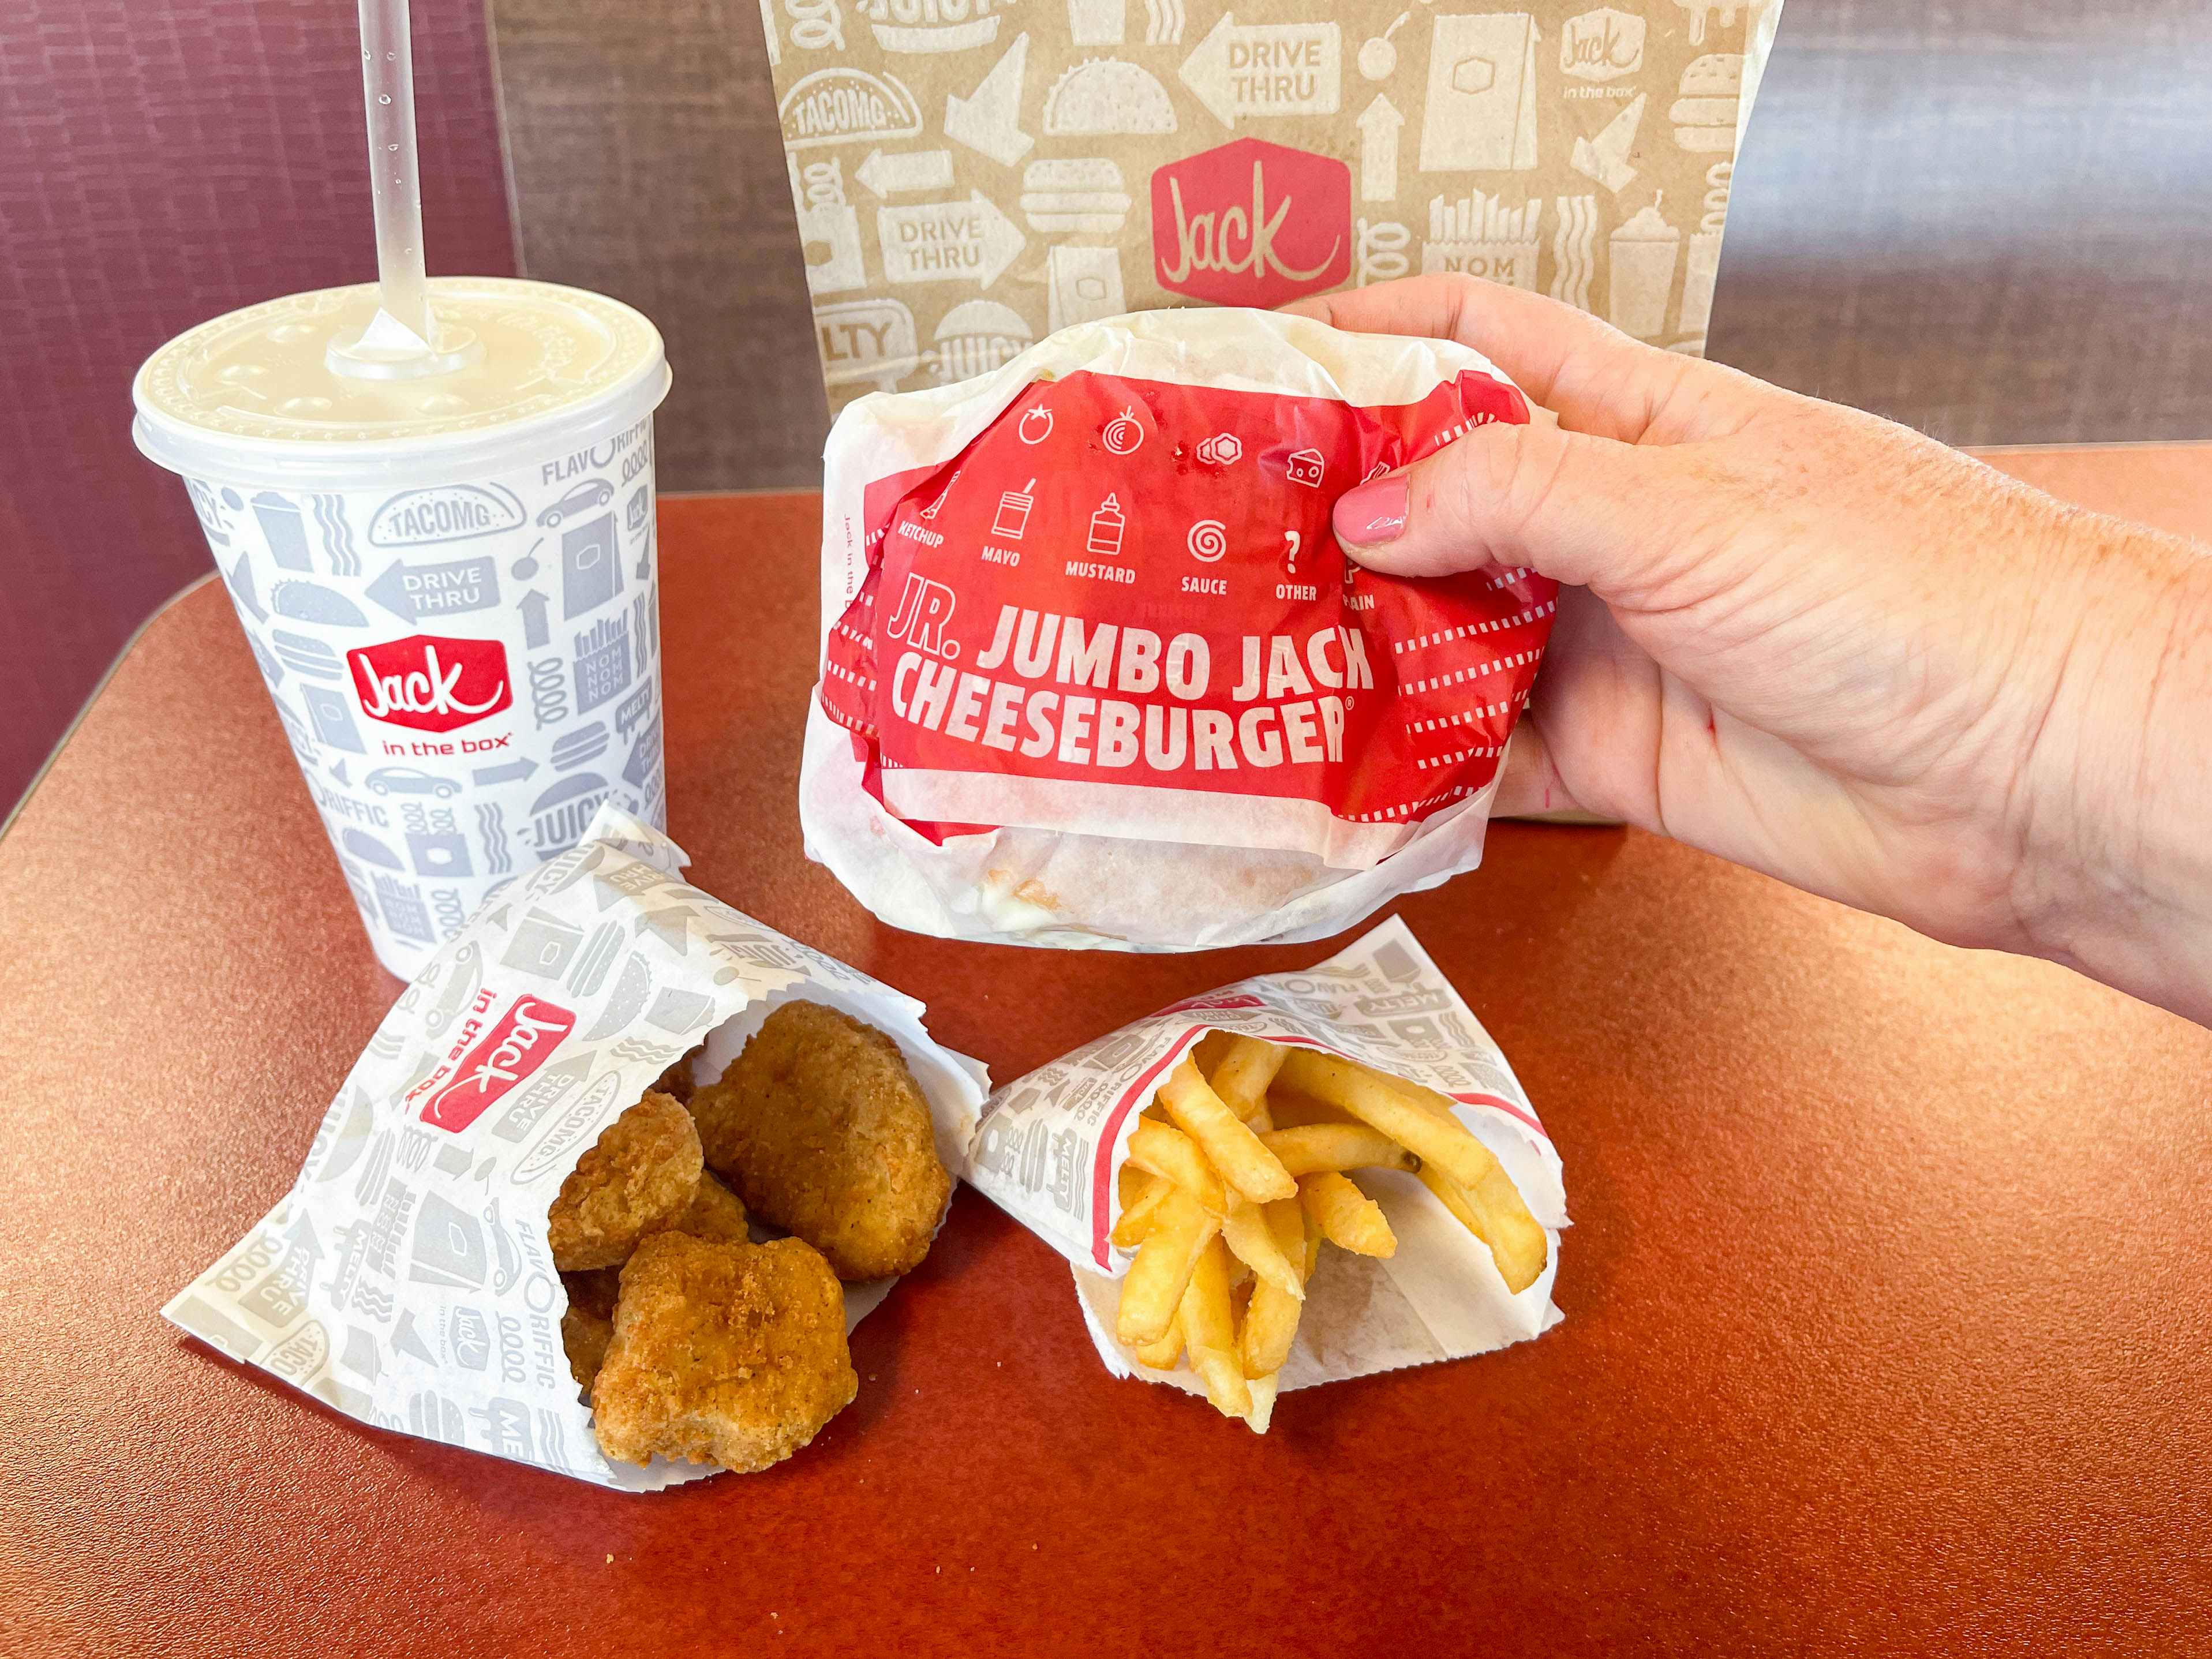 jack in the box value menu items on table with jr jack burger being held up